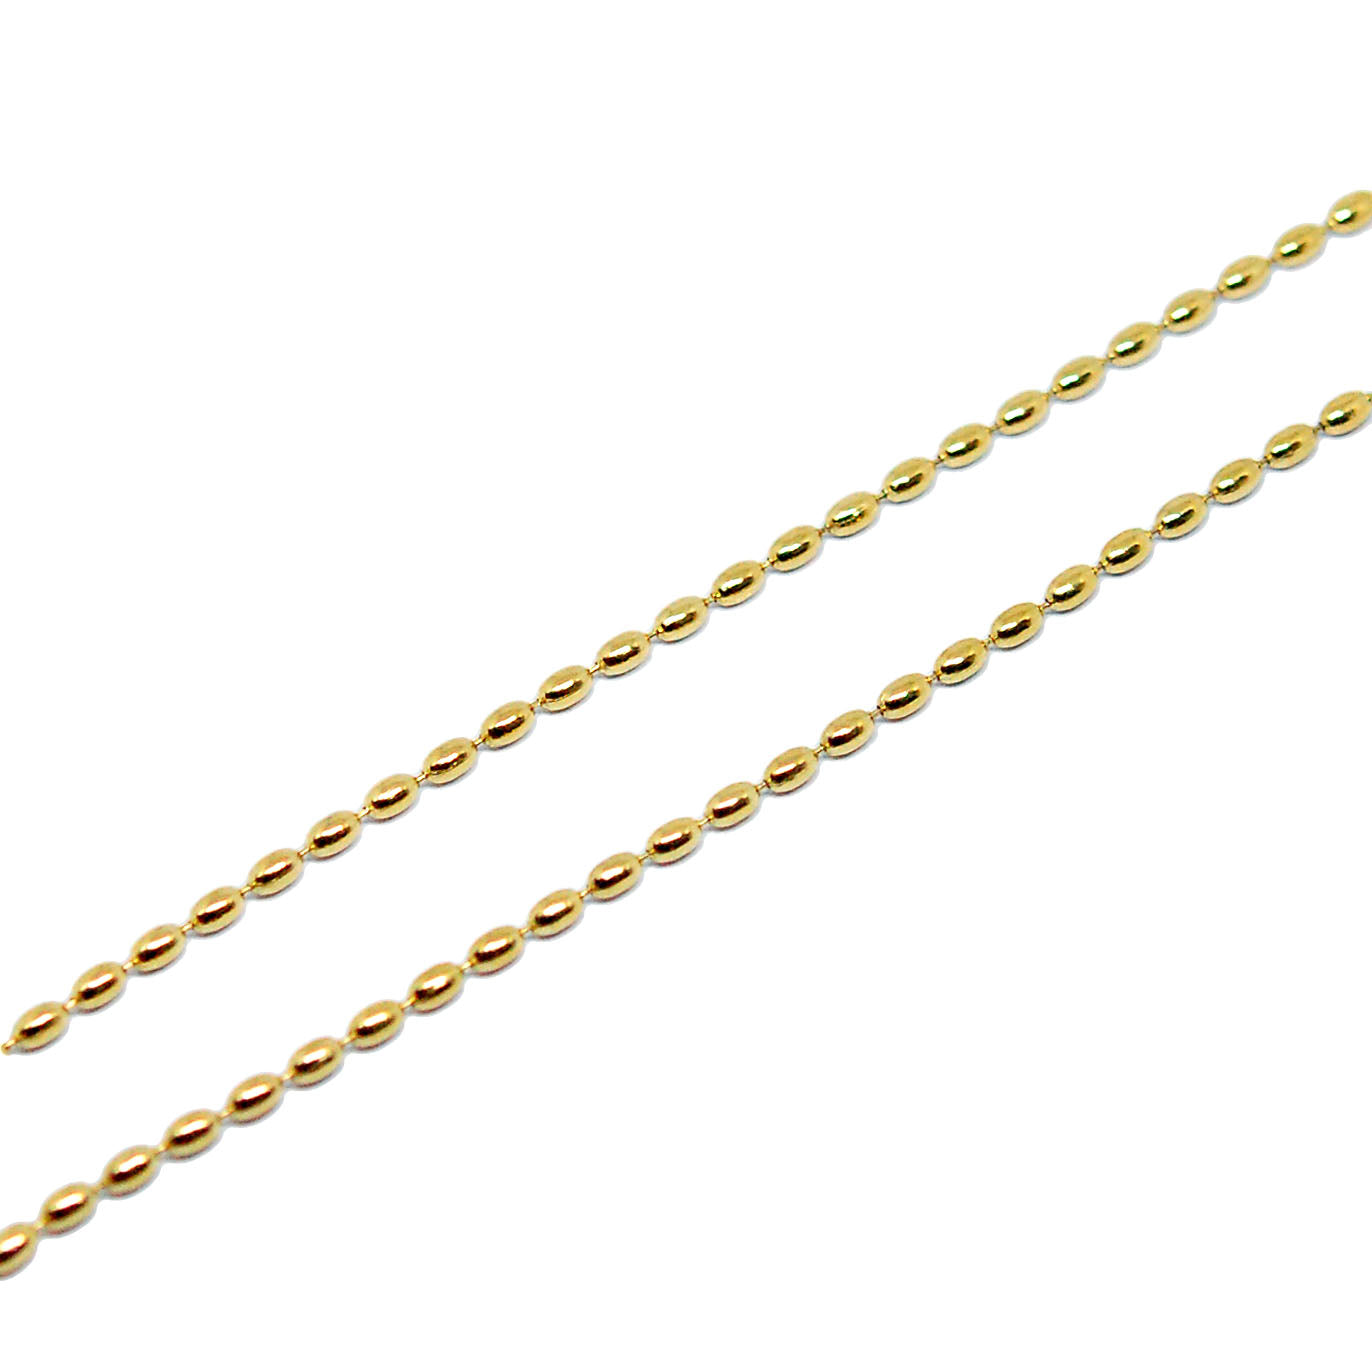 ESN 8039: All IPG Oval Steel Ball Necklace (16"+2")